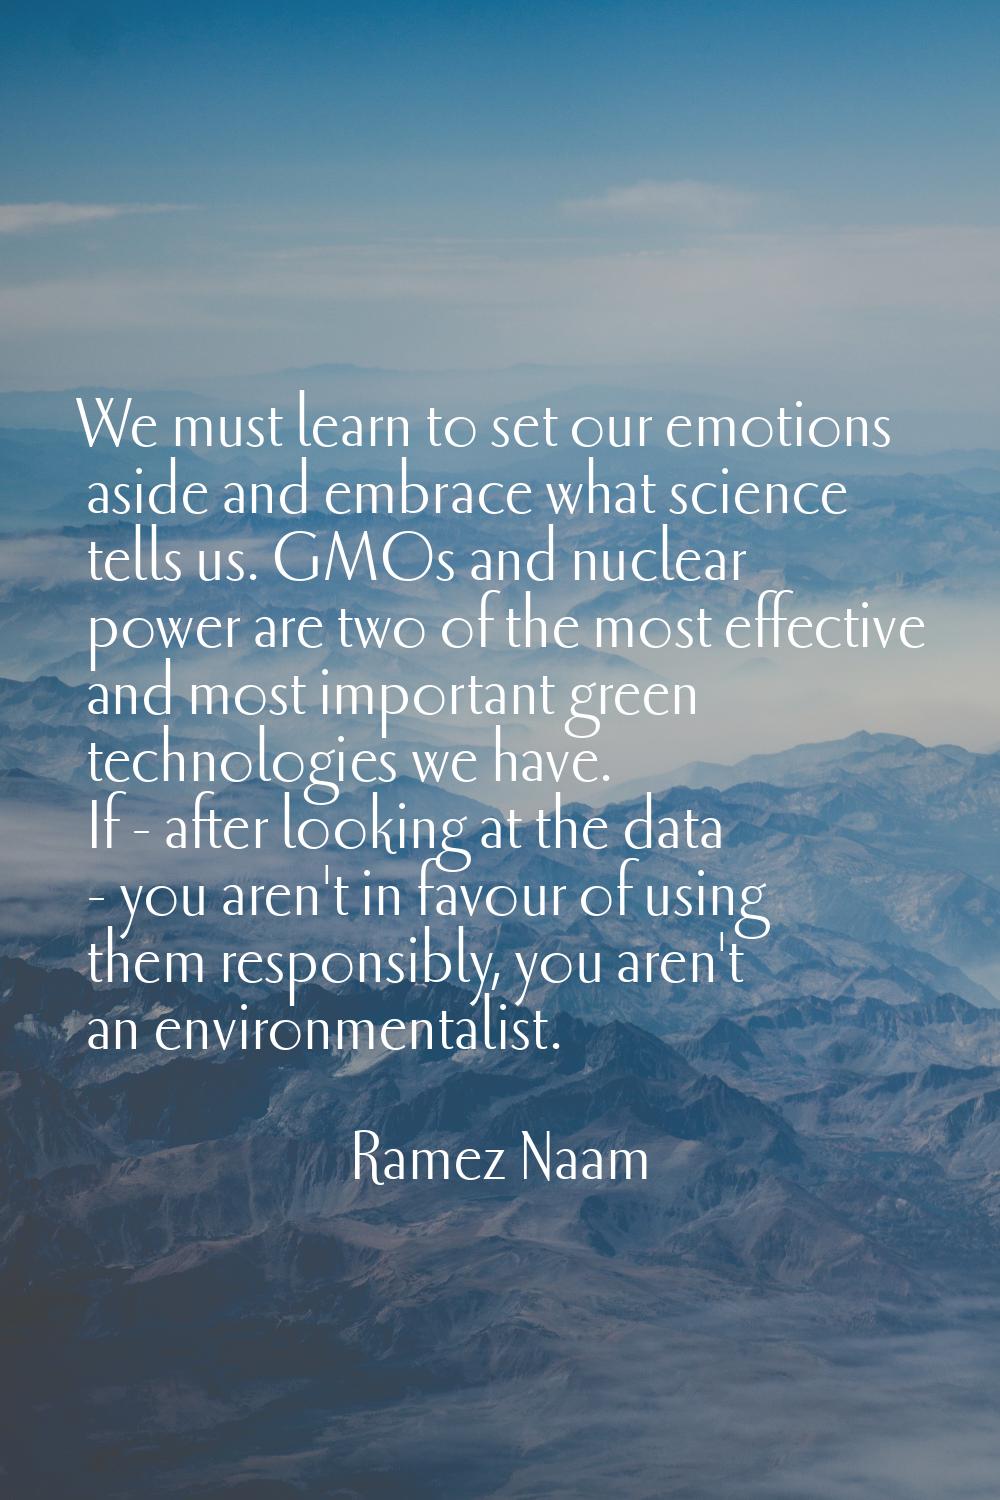 We must learn to set our emotions aside and embrace what science tells us. GMOs and nuclear power a